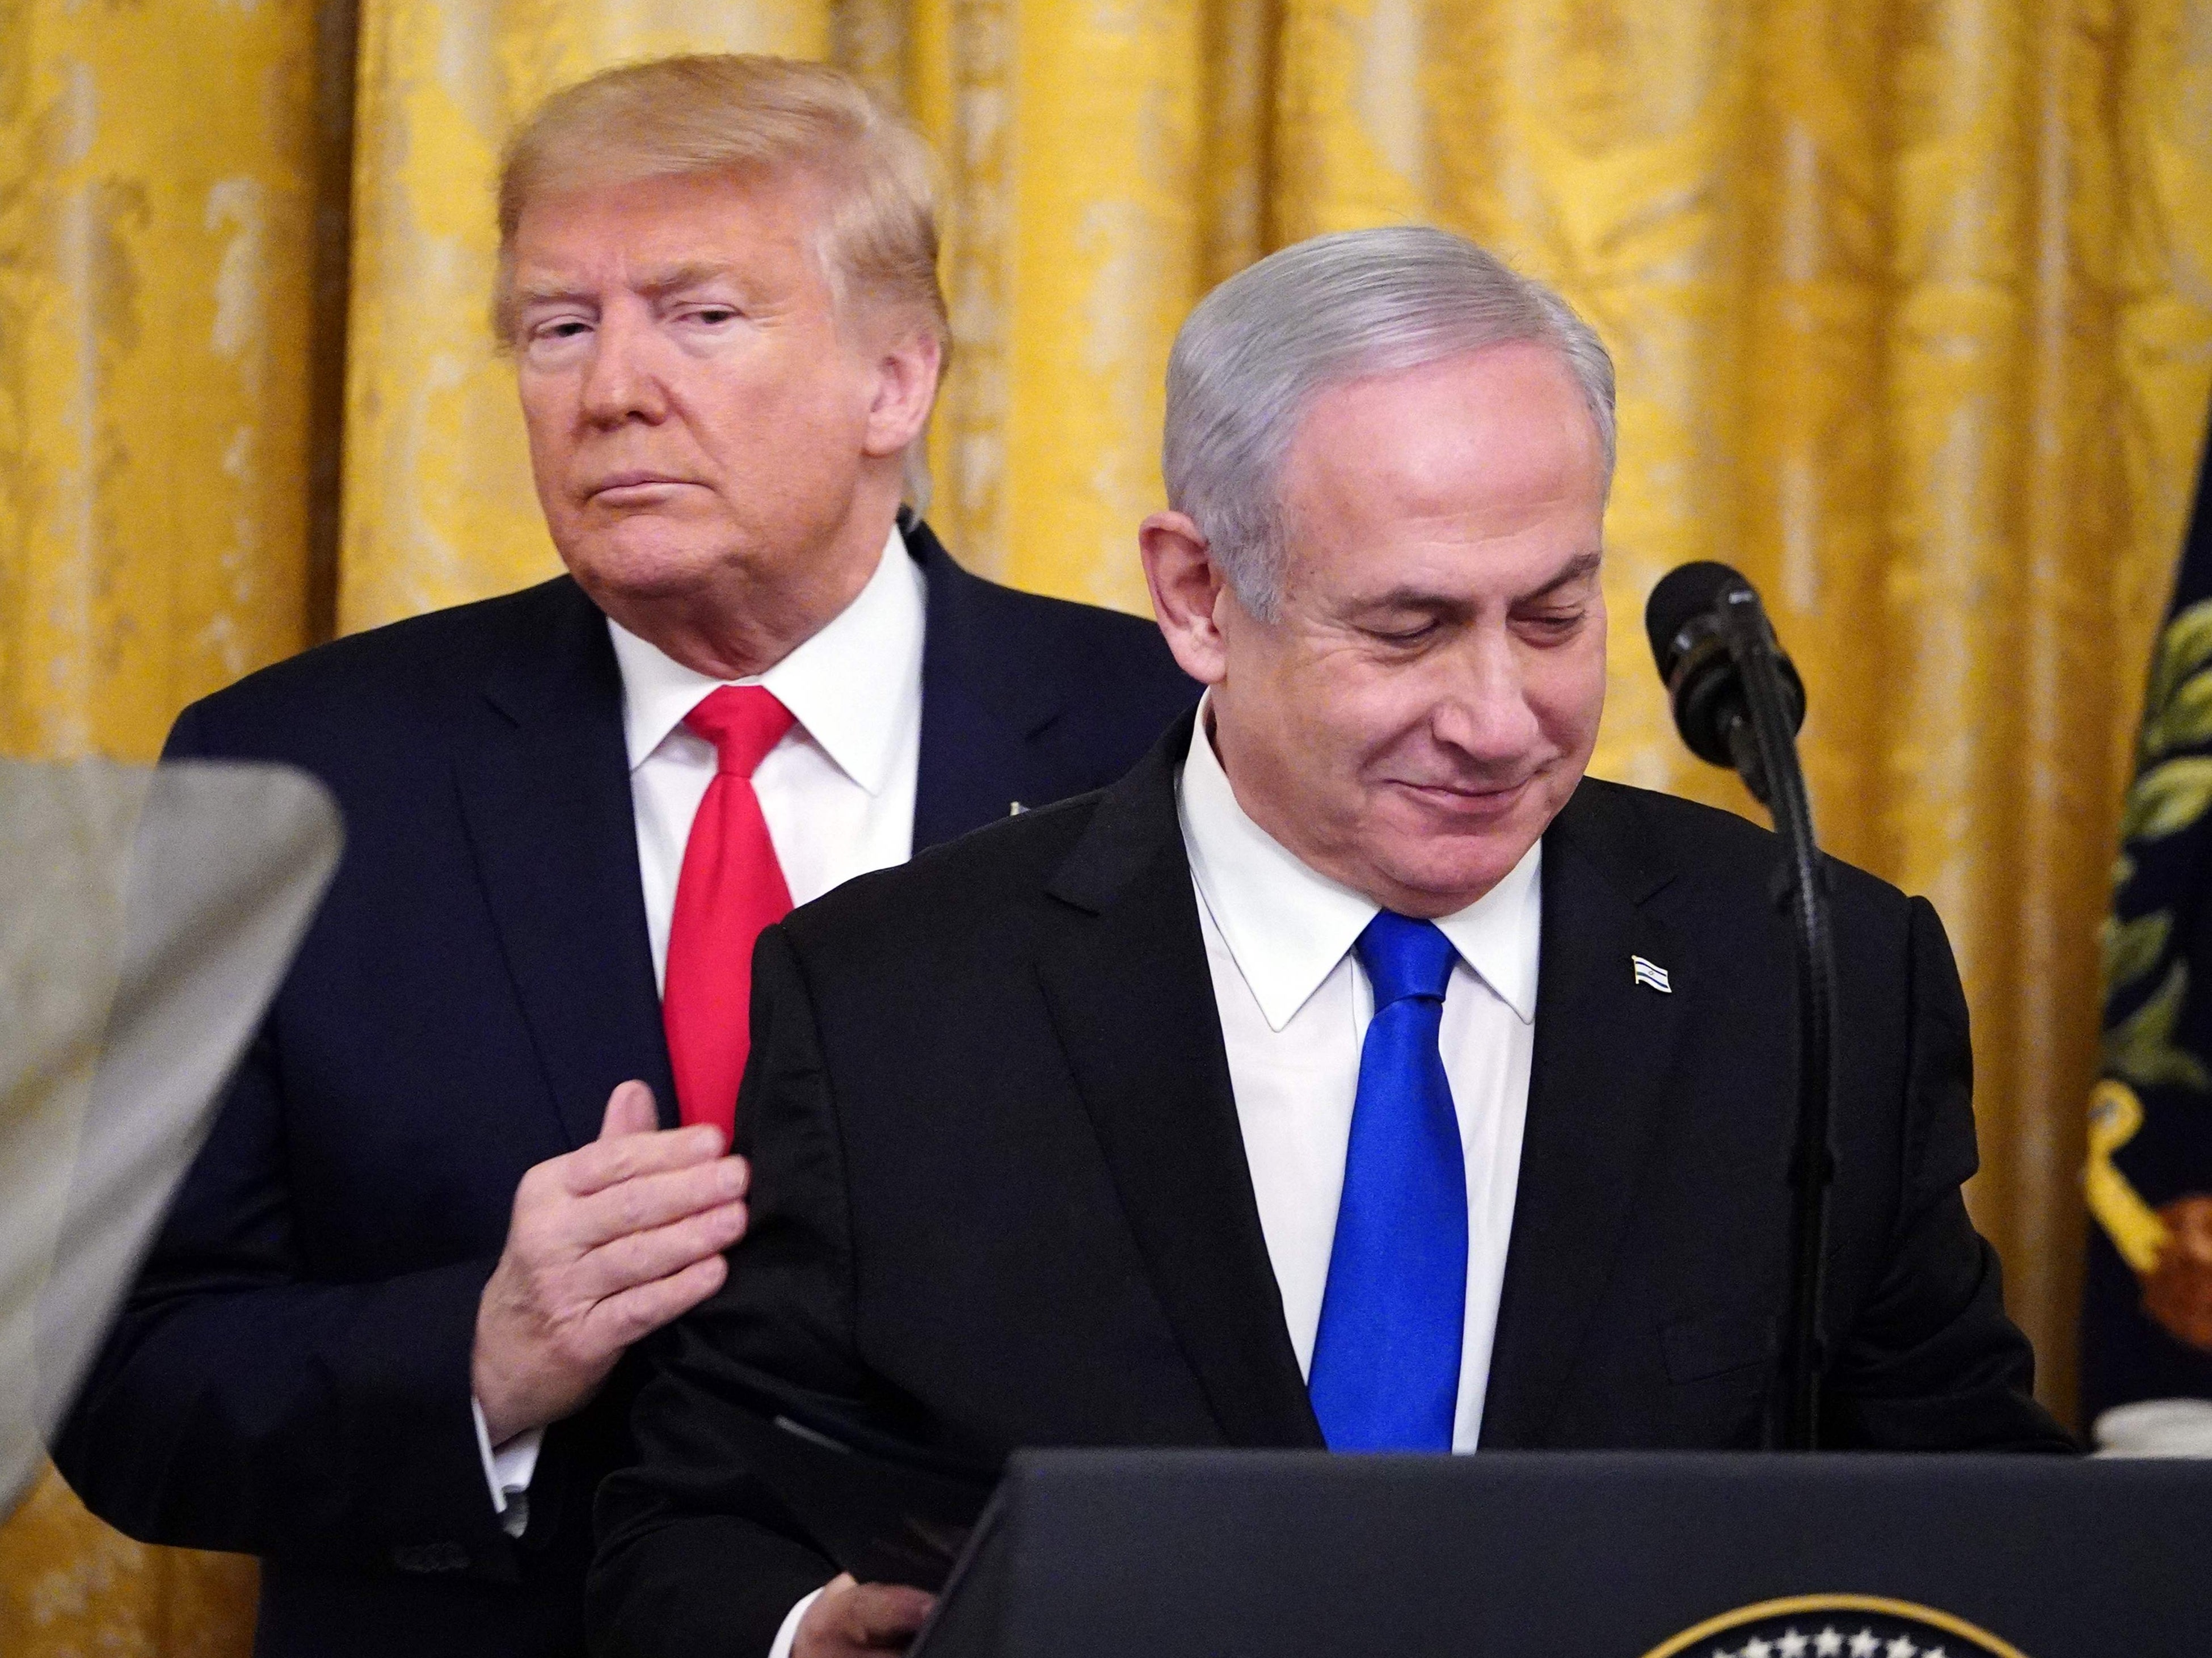 Donald Trump and Benjamin Netanyahu at the announcement of the Middle East peace plan in January 2020